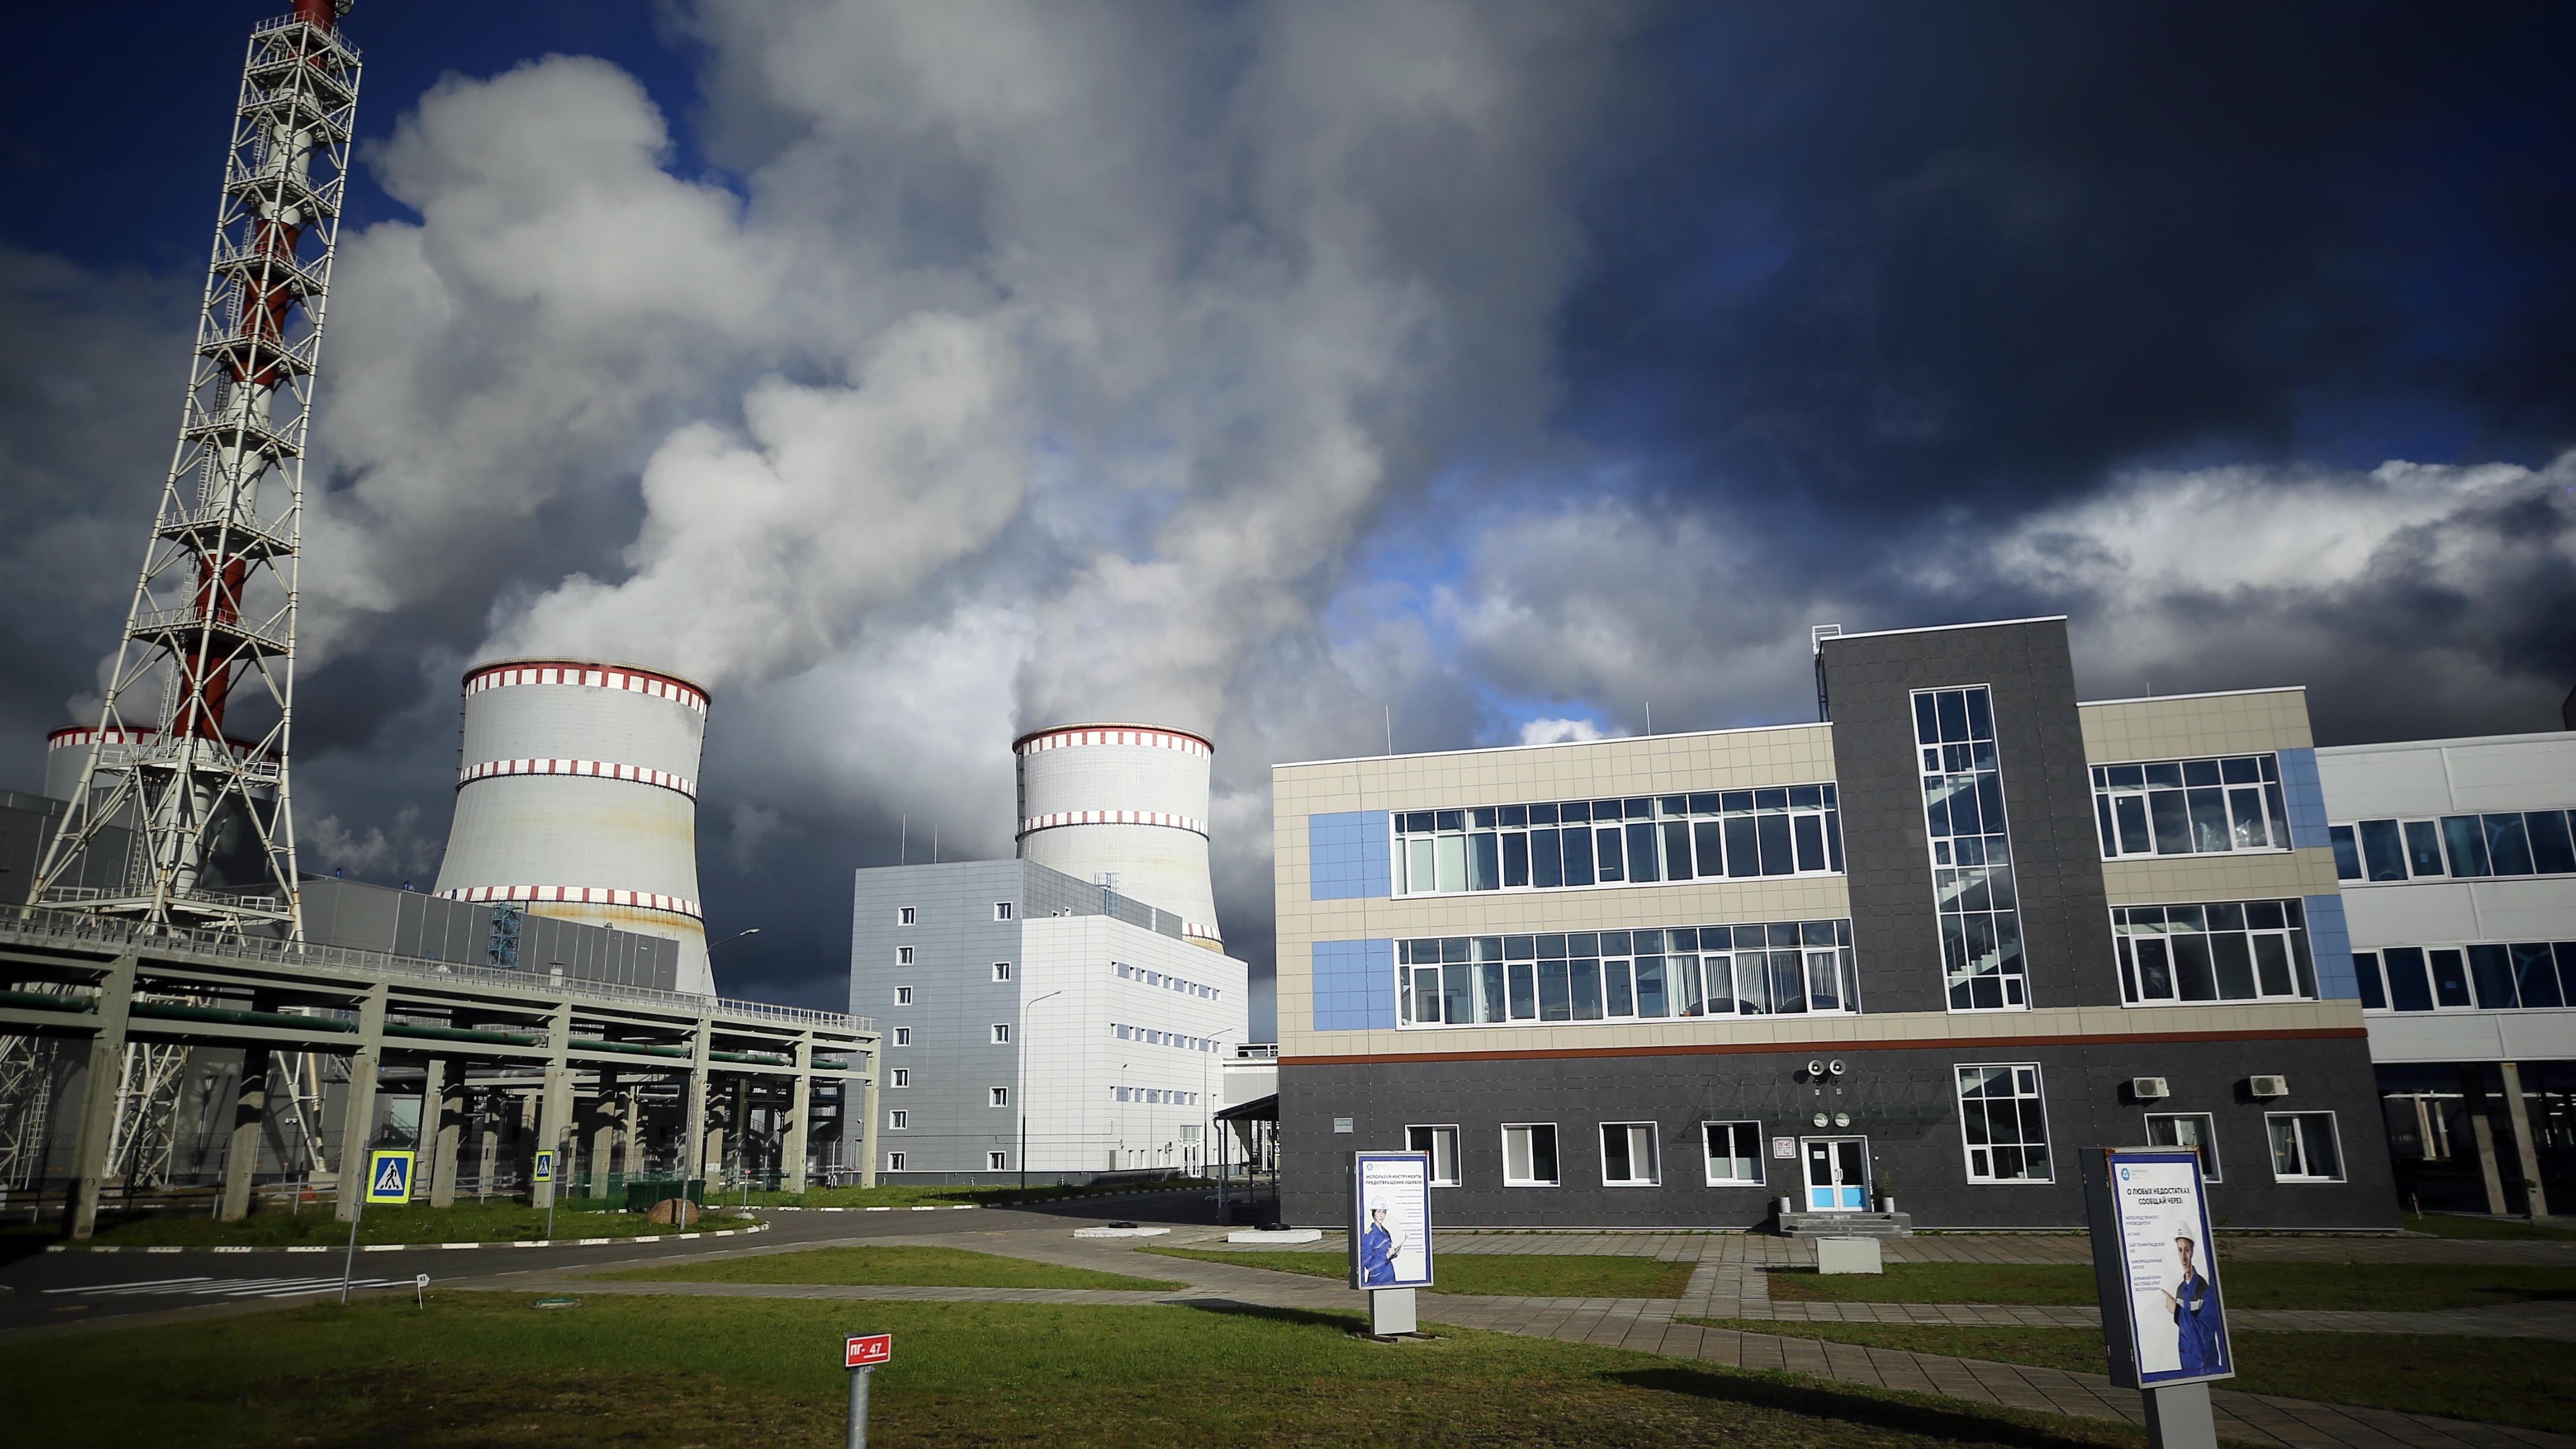 Russia's largest nuclear power plant for century - Agency